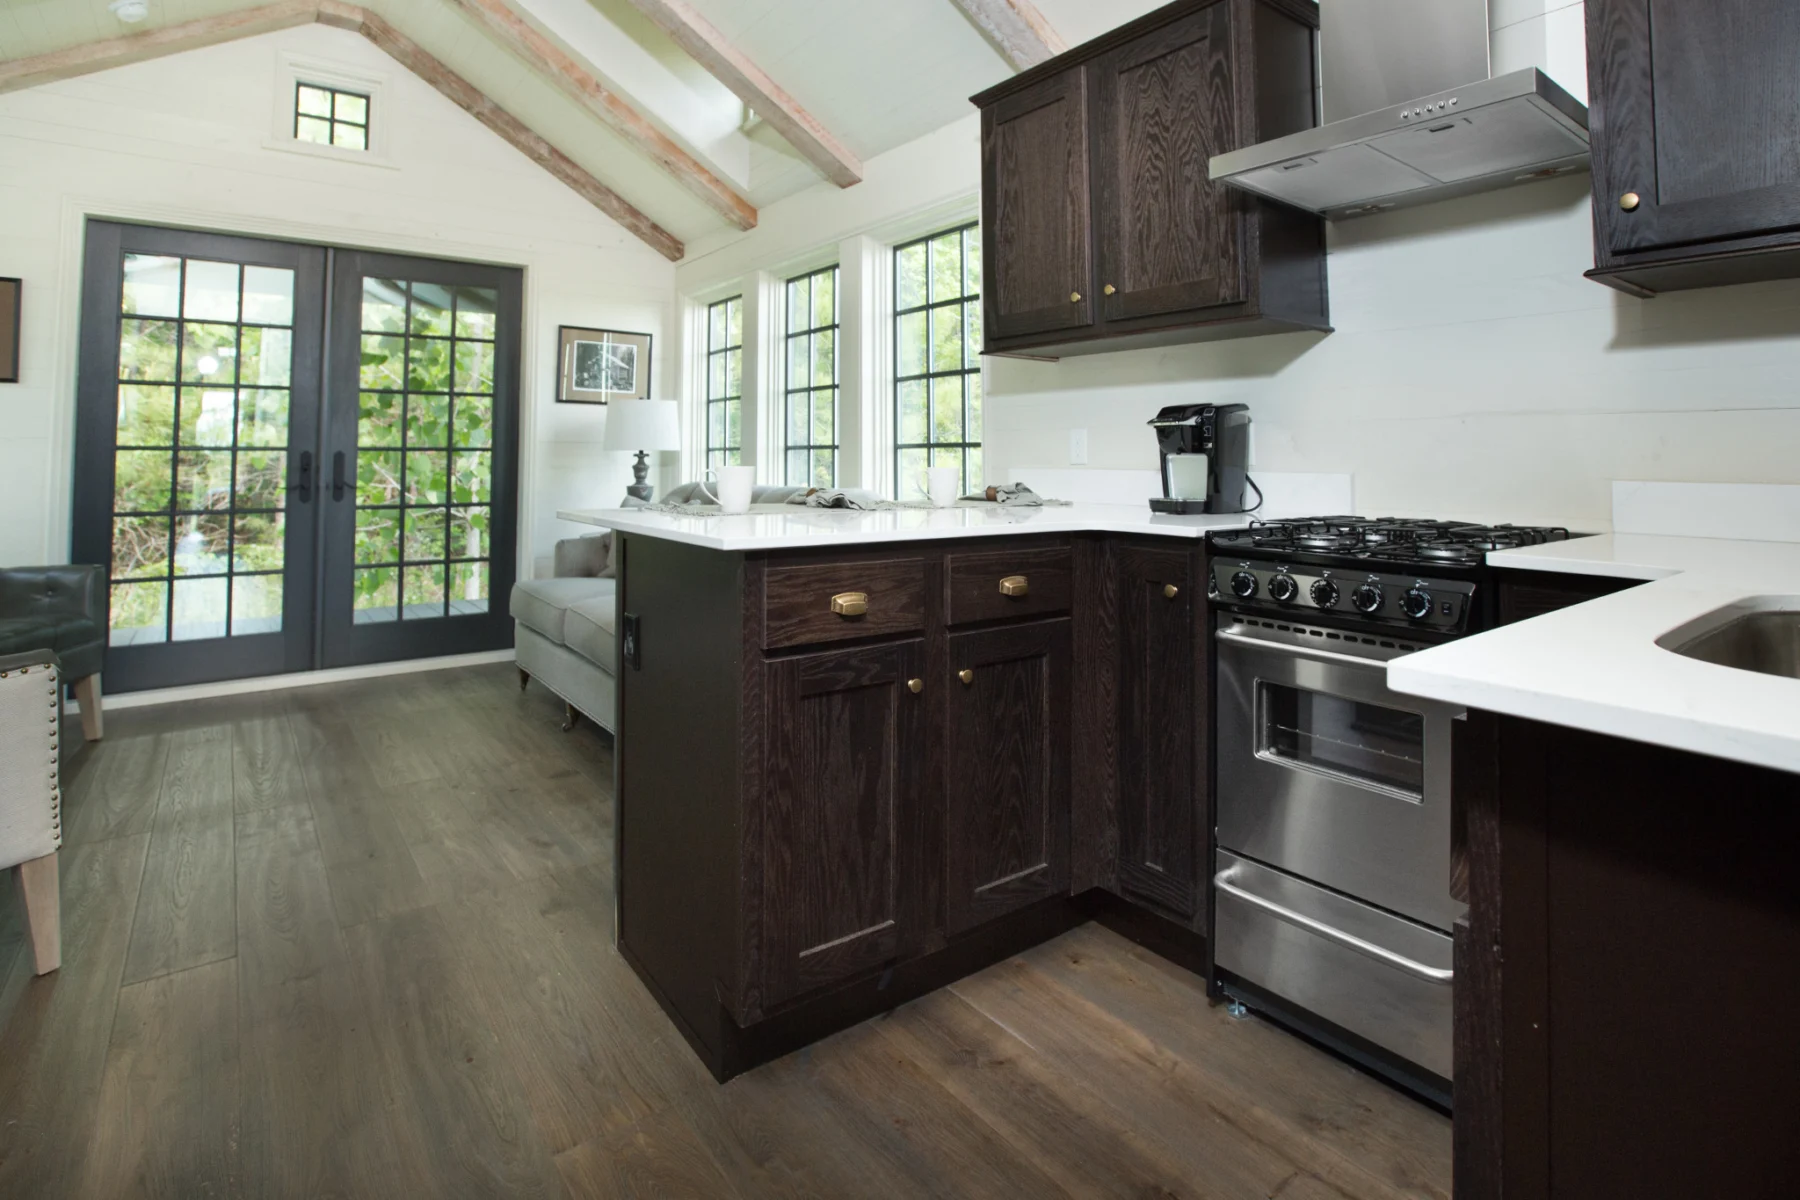 Large Kitchen Counters - Low Country by Designer Cottages